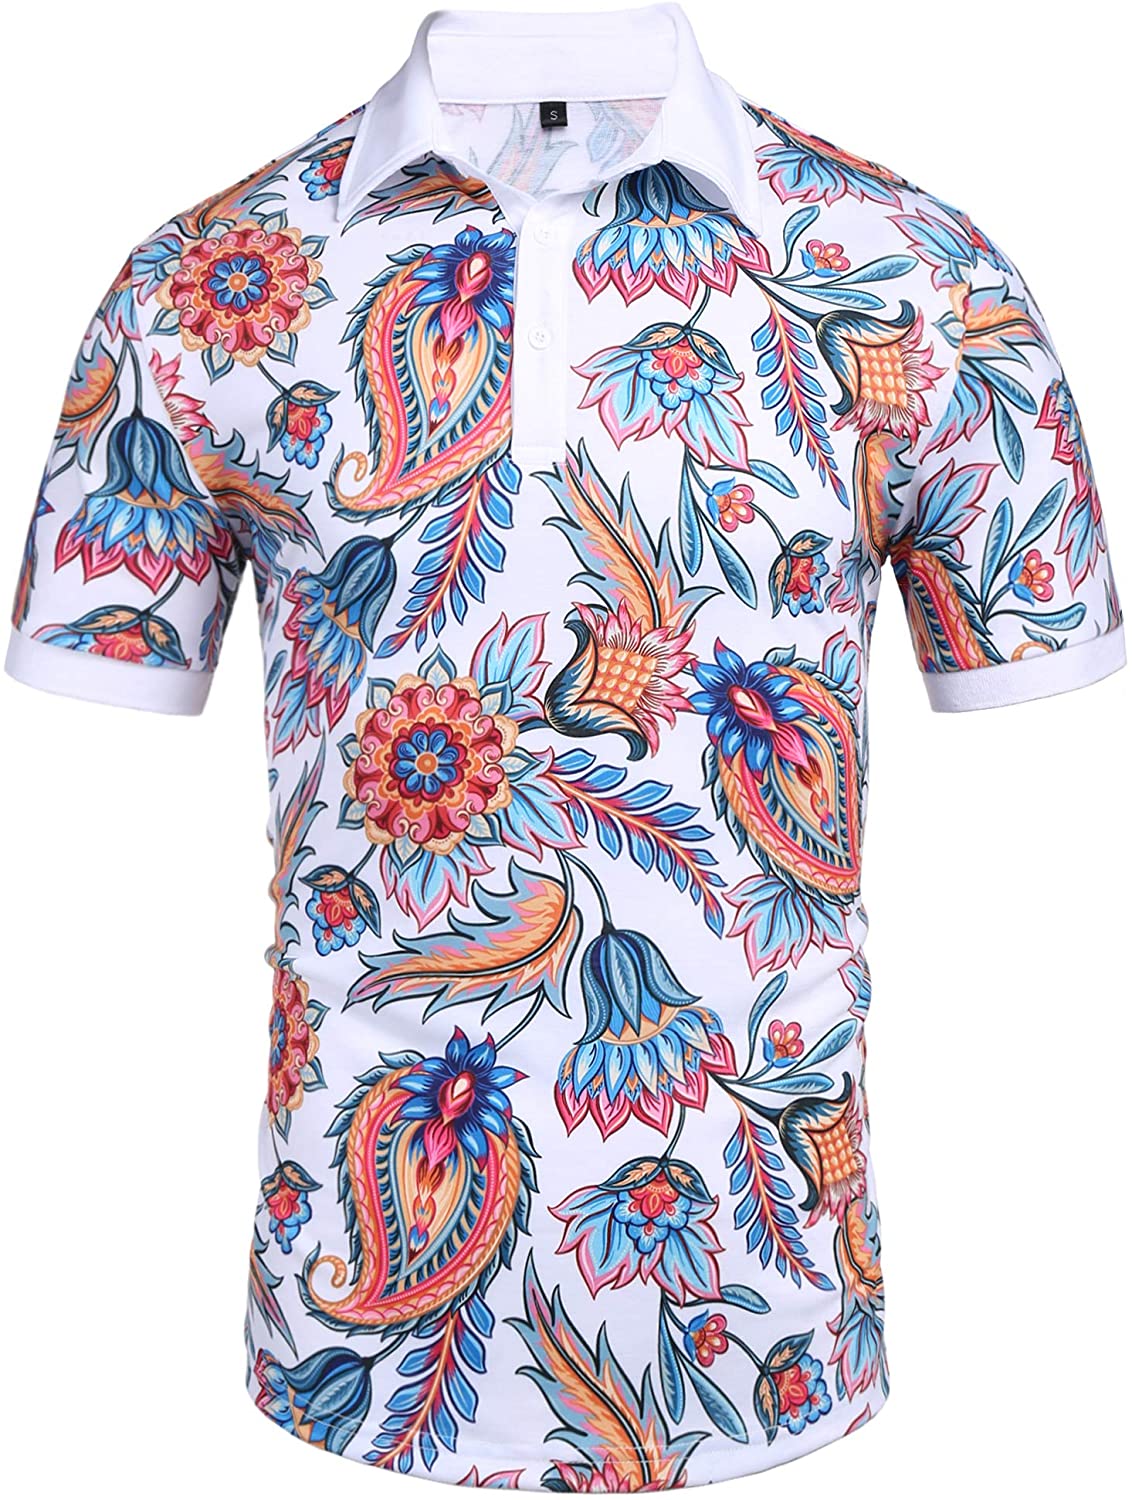 Daupanzees Men's Luxury Casual Long Sleeve Floral Print Jersey Polo Shirt 